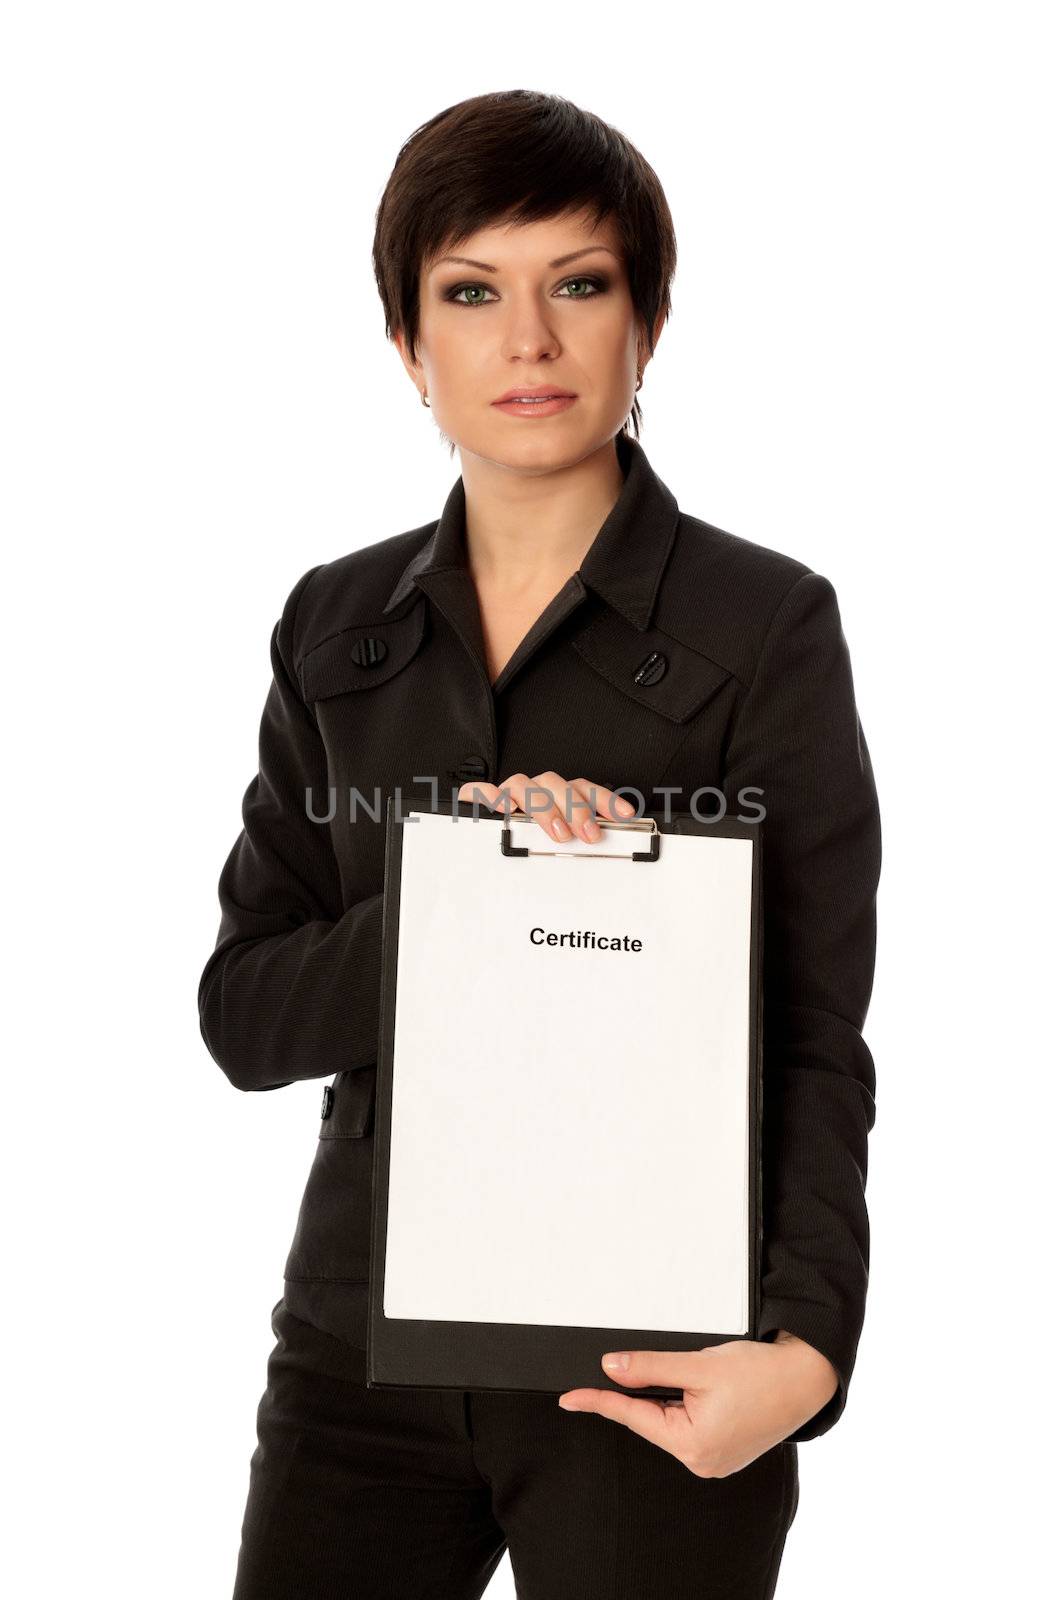 The office worker taking out the certificate from a document case